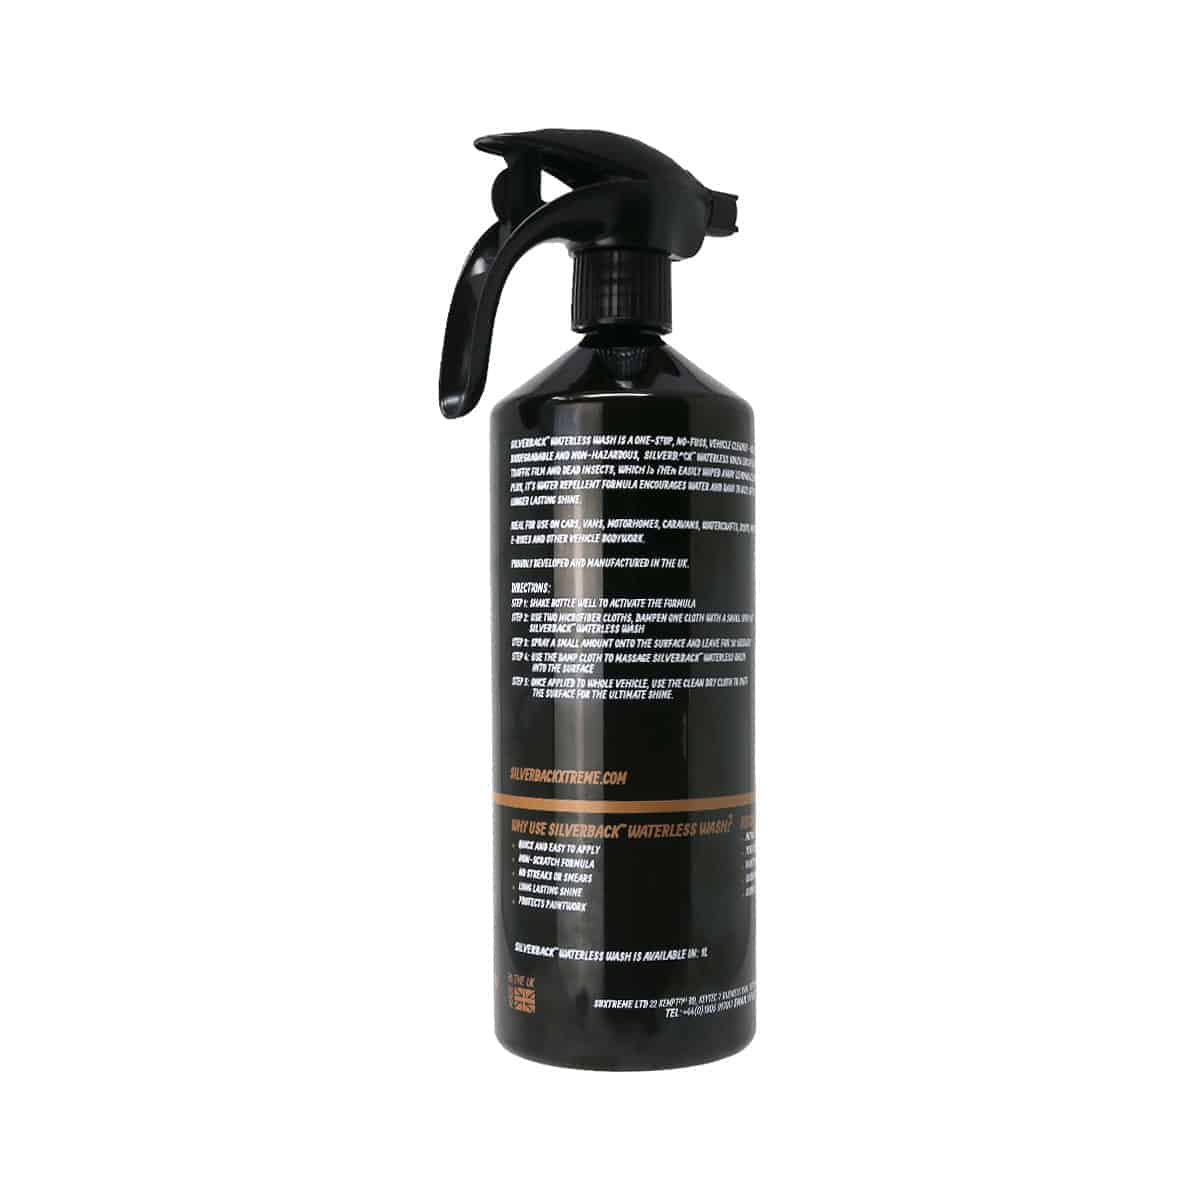 Silverback Waterless Wash: One-stop vehicle cleaner when there is no water instructions